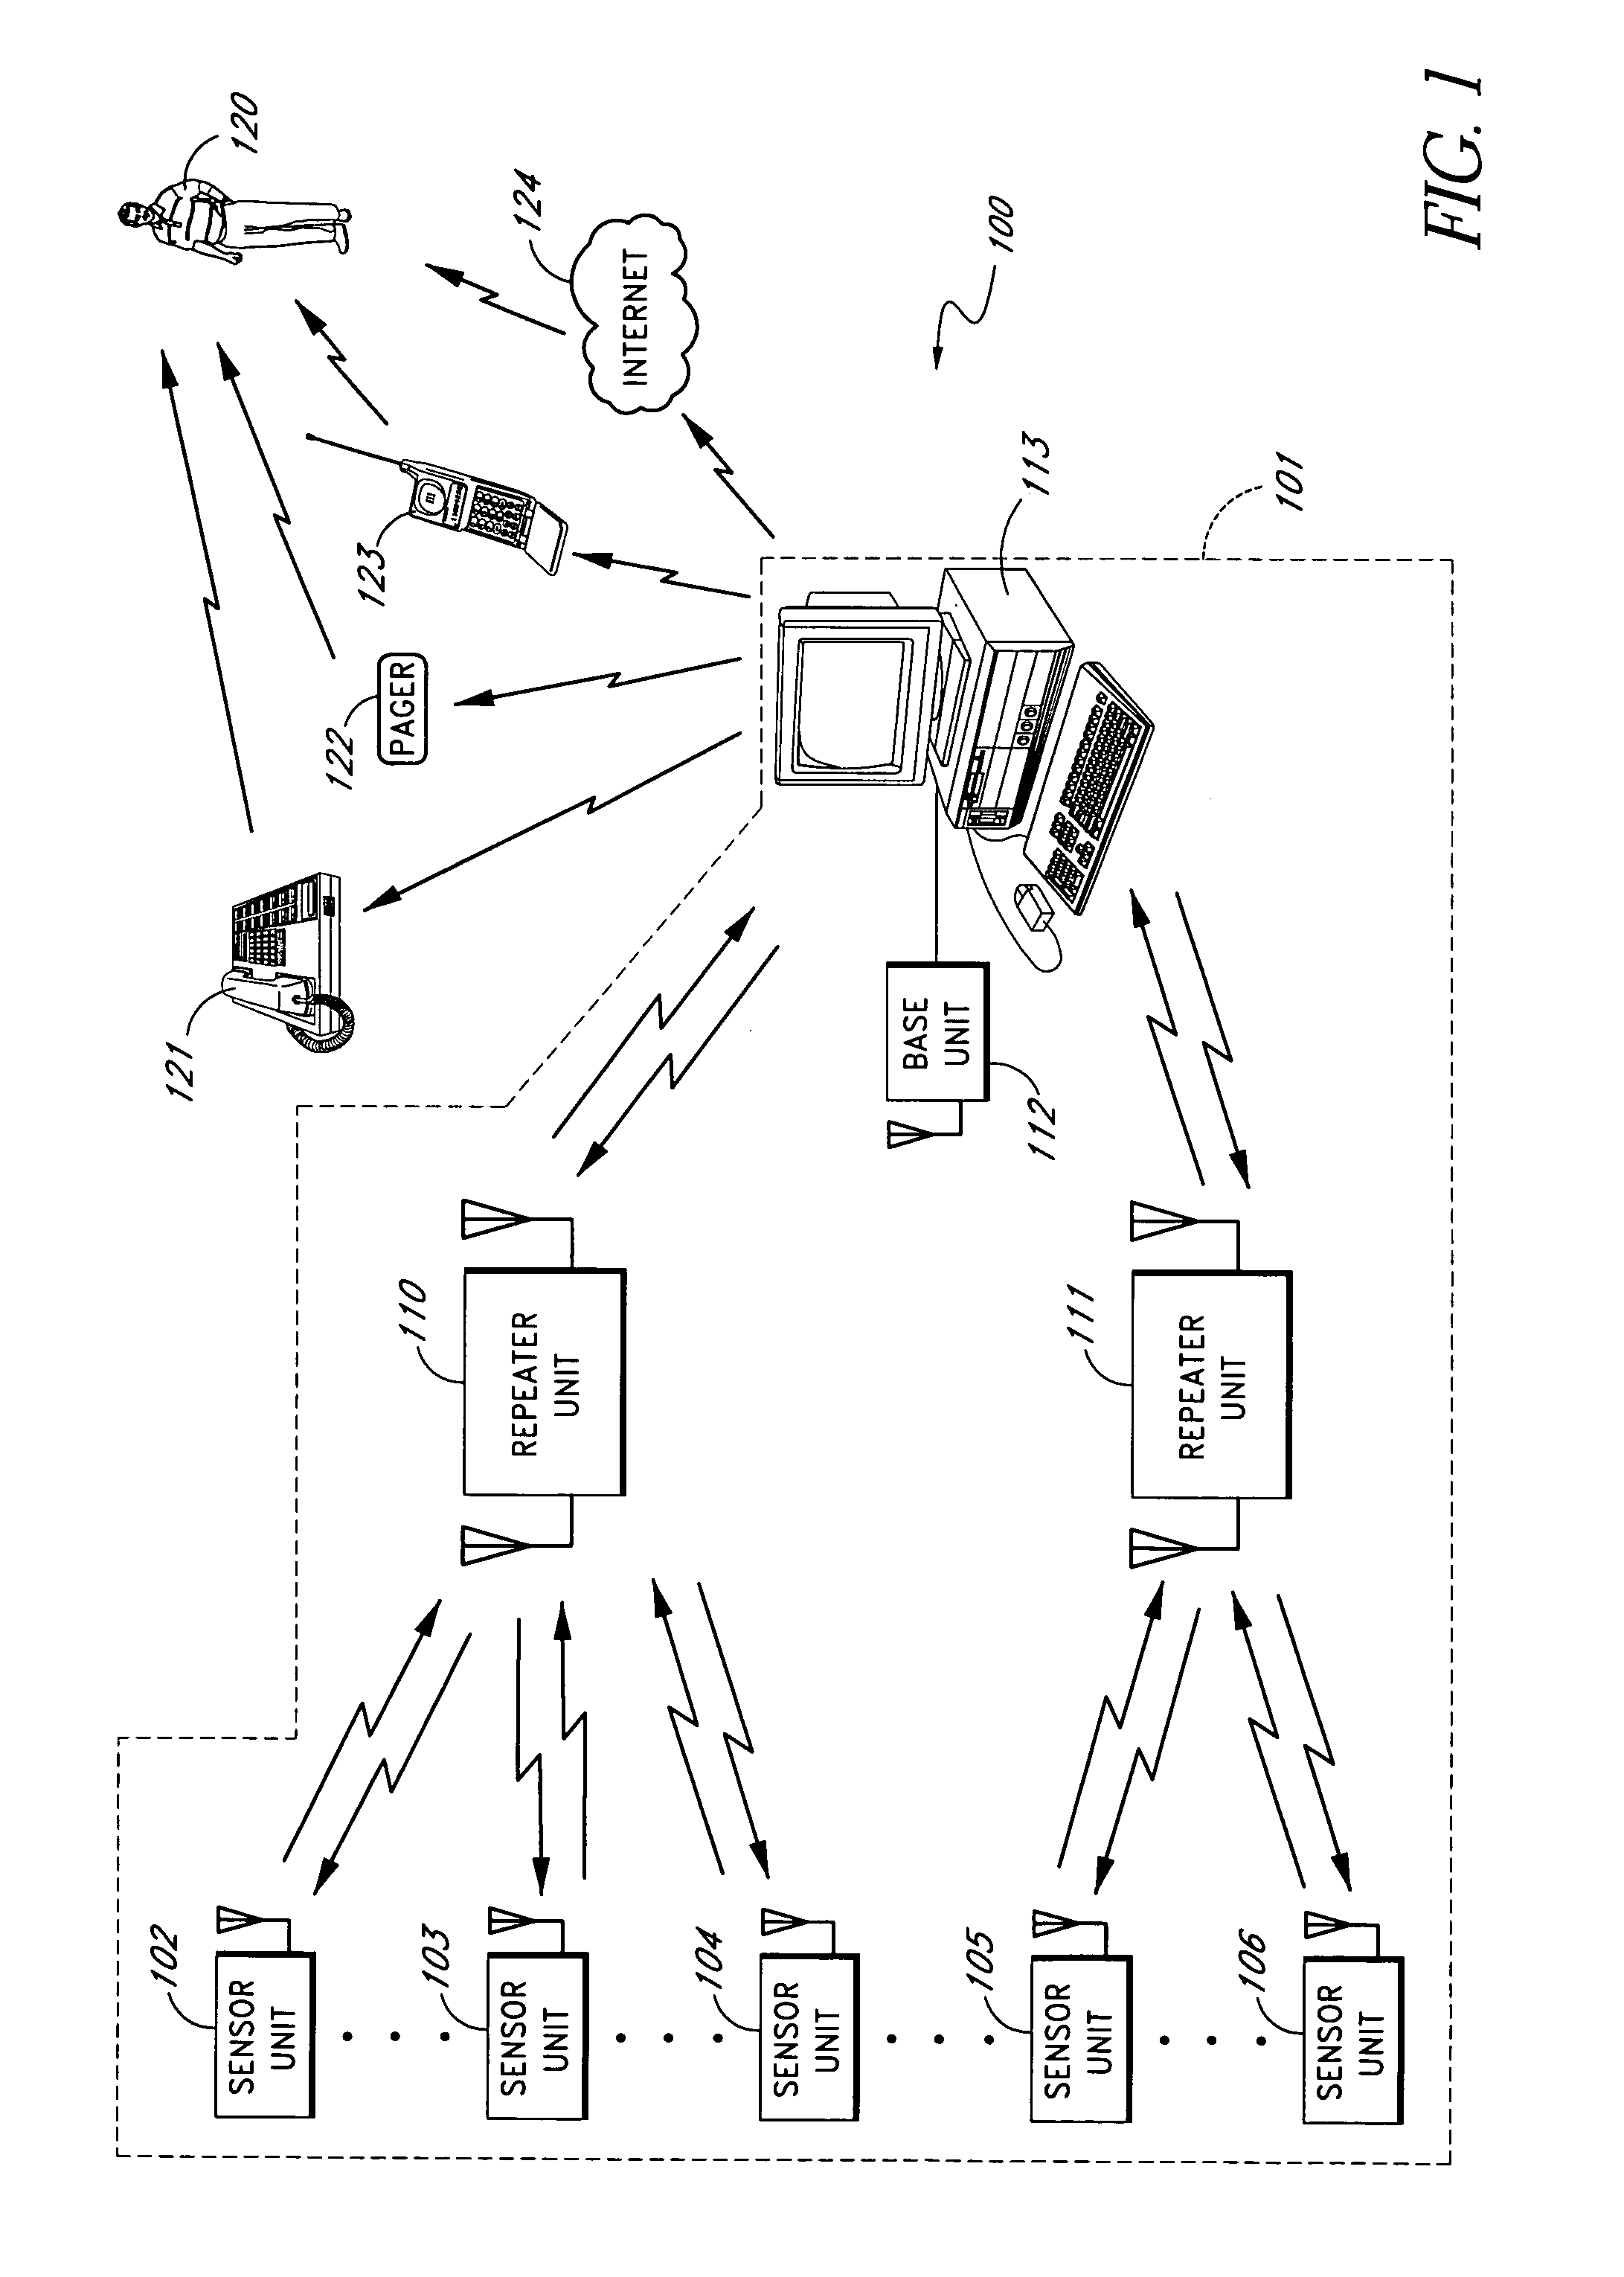 Method and apparatus for detecting moisture in building materials